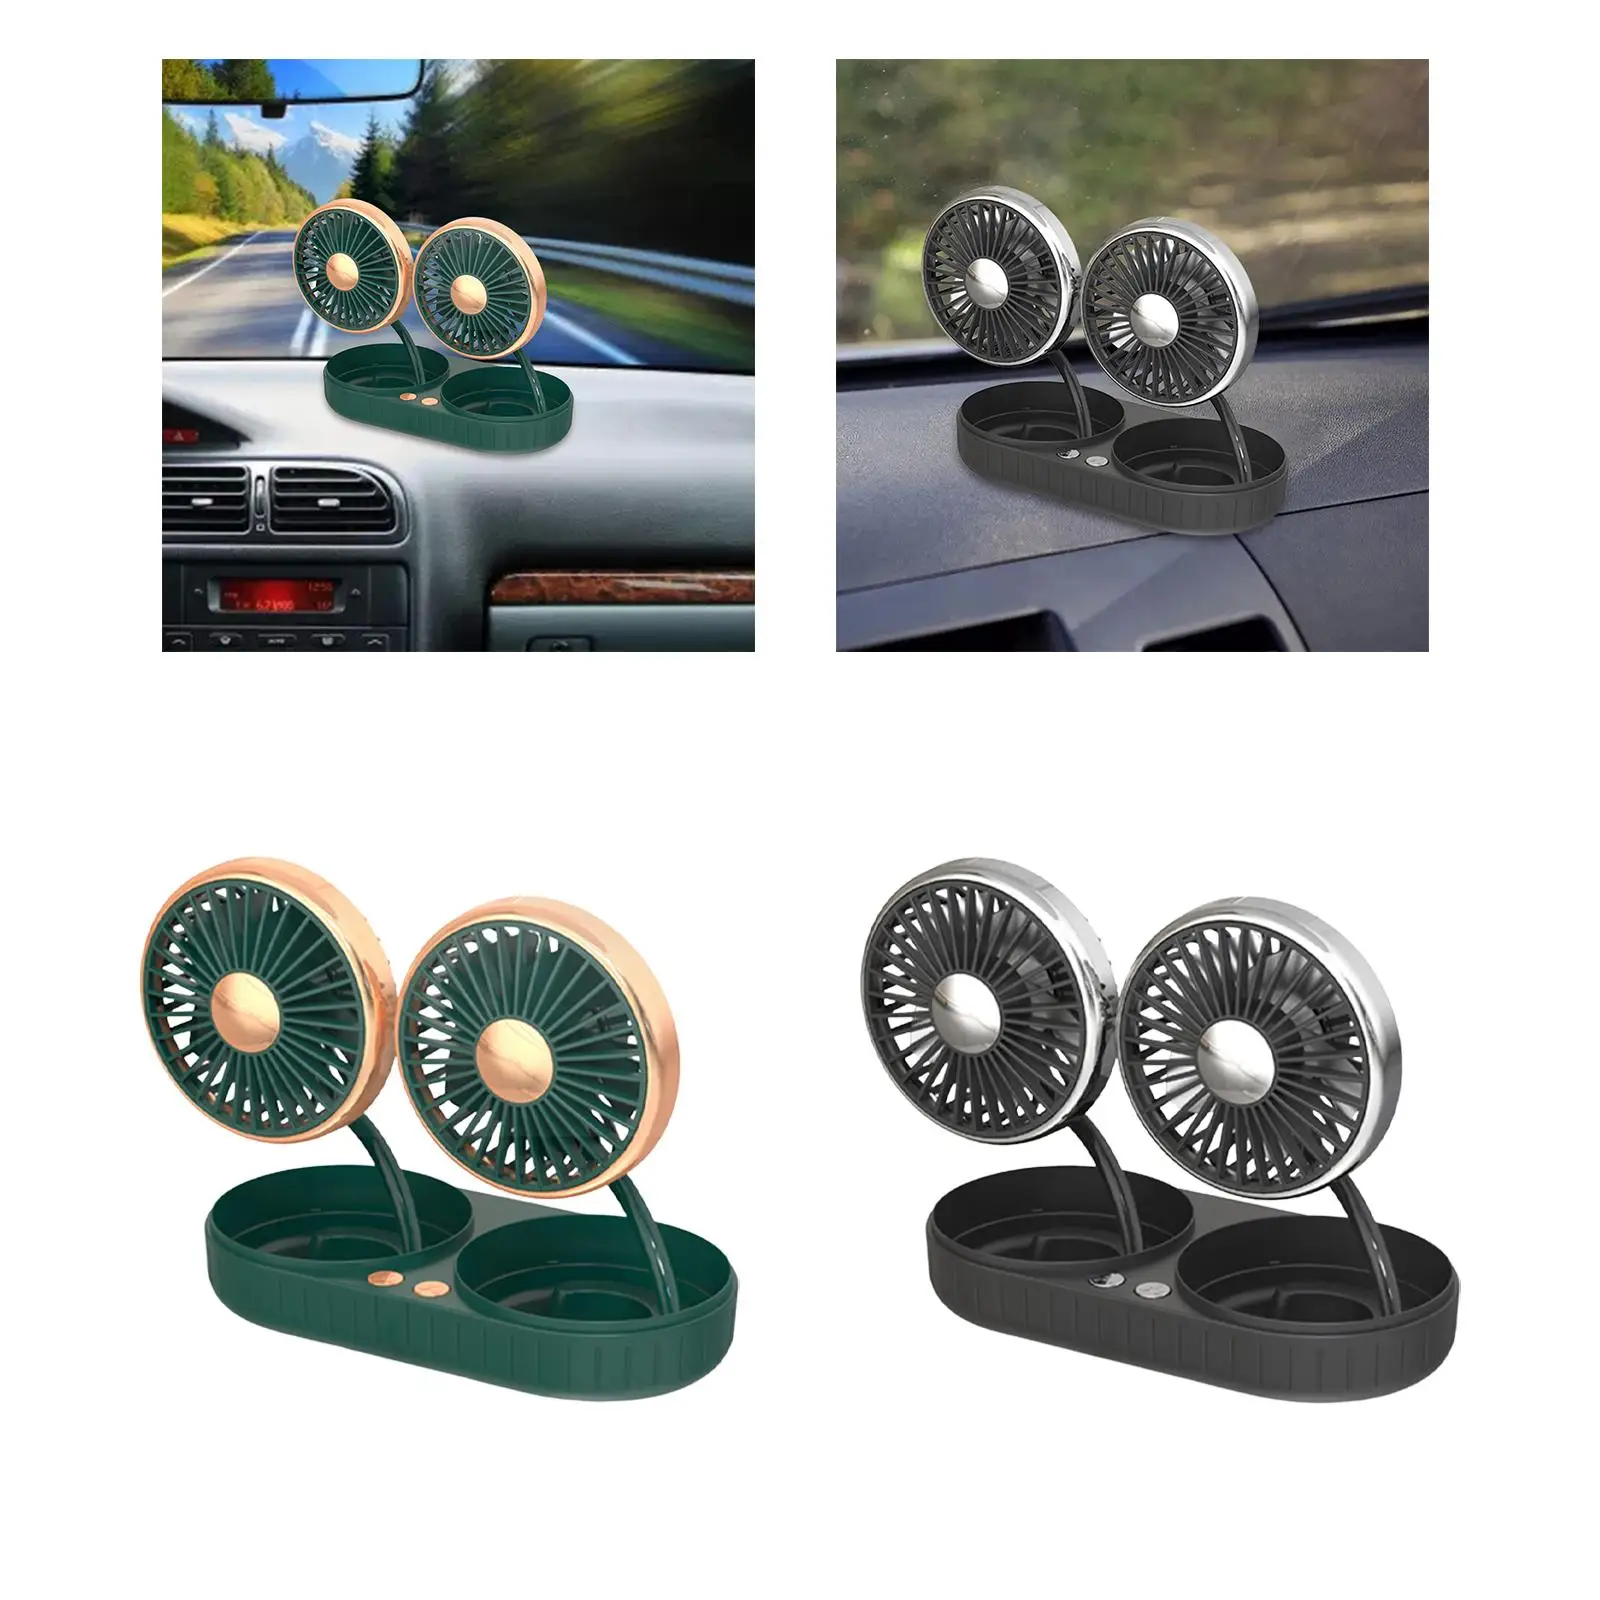 Vehicle Fans Dual Heads 360 Degree Rotation Automobile Strong Wind USB Rechargeable Supplies Car Fan for Vehicles SUV Truck